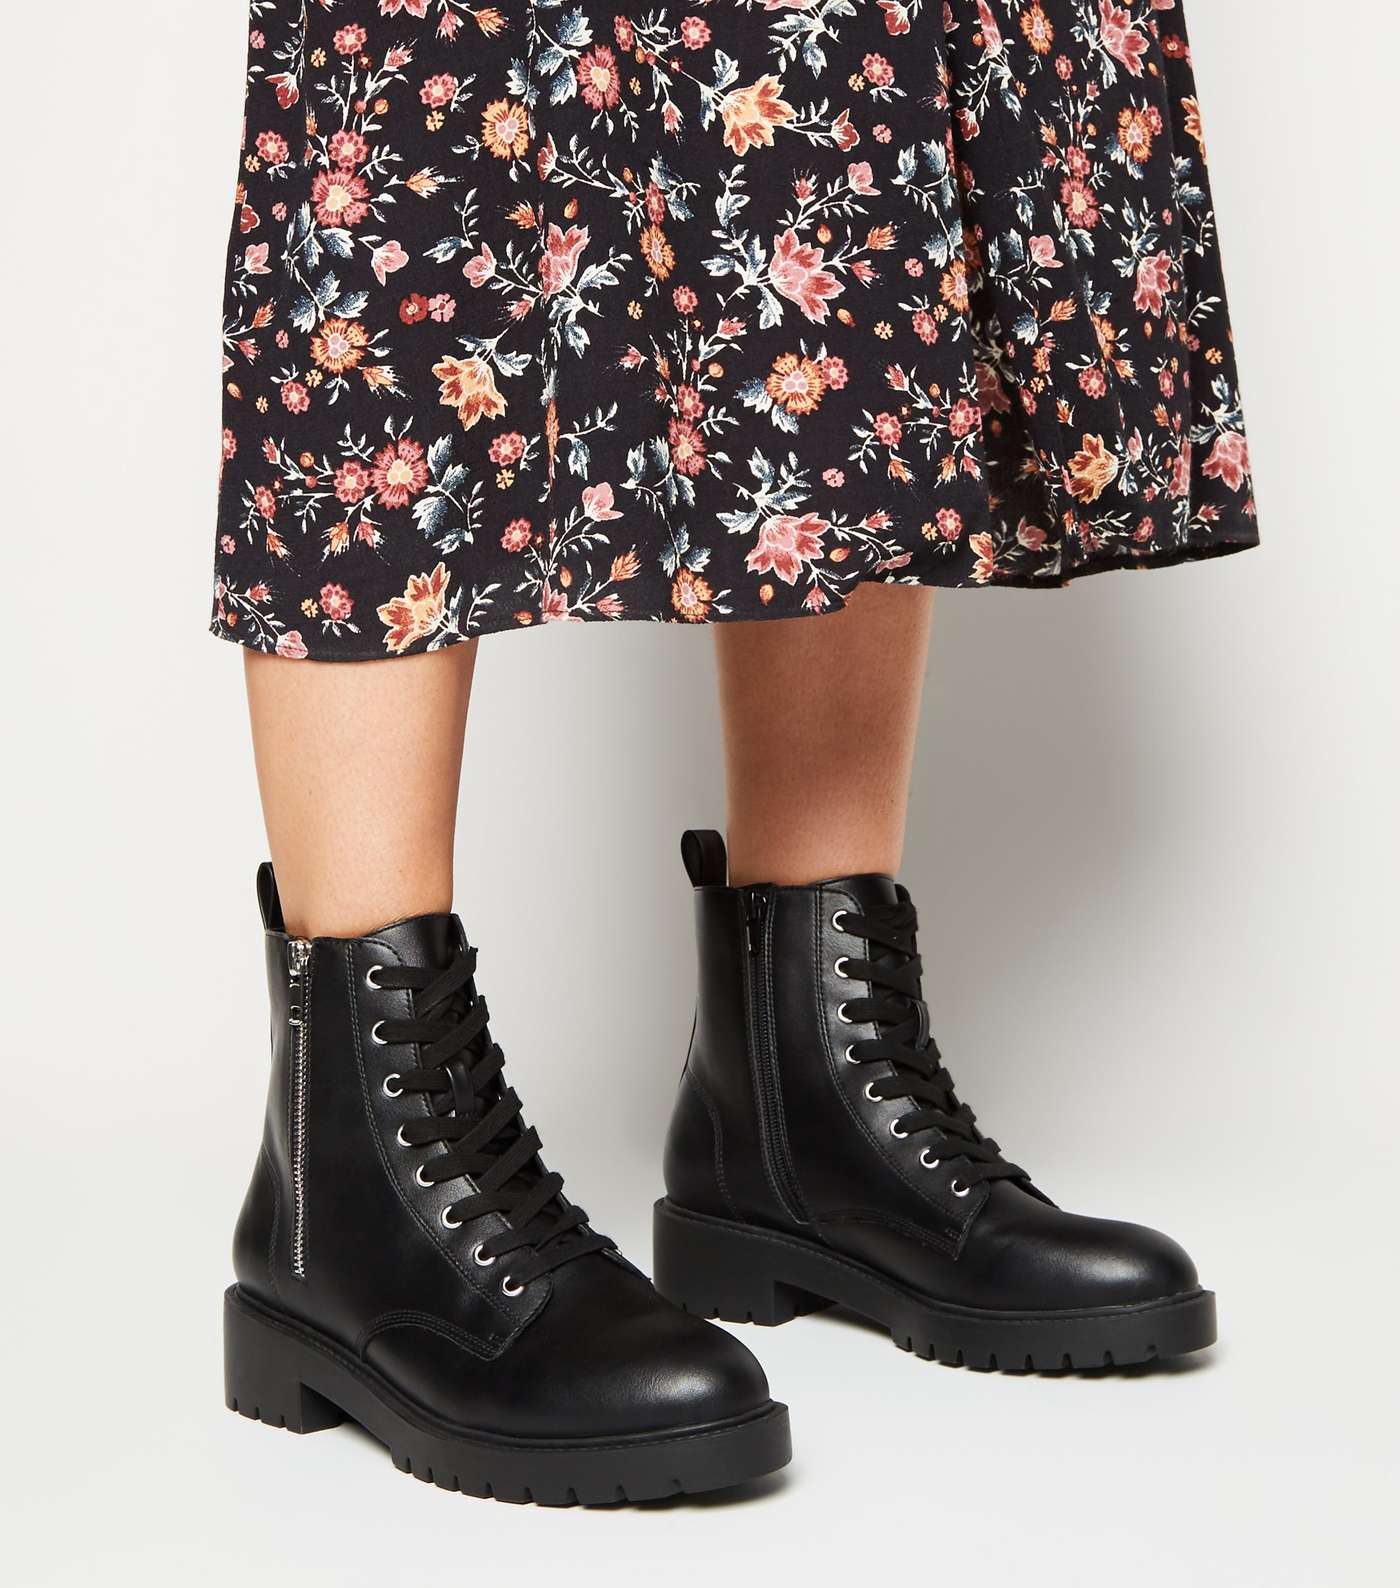 Black Leather-Look Side Zip Chunky Boots Image 2